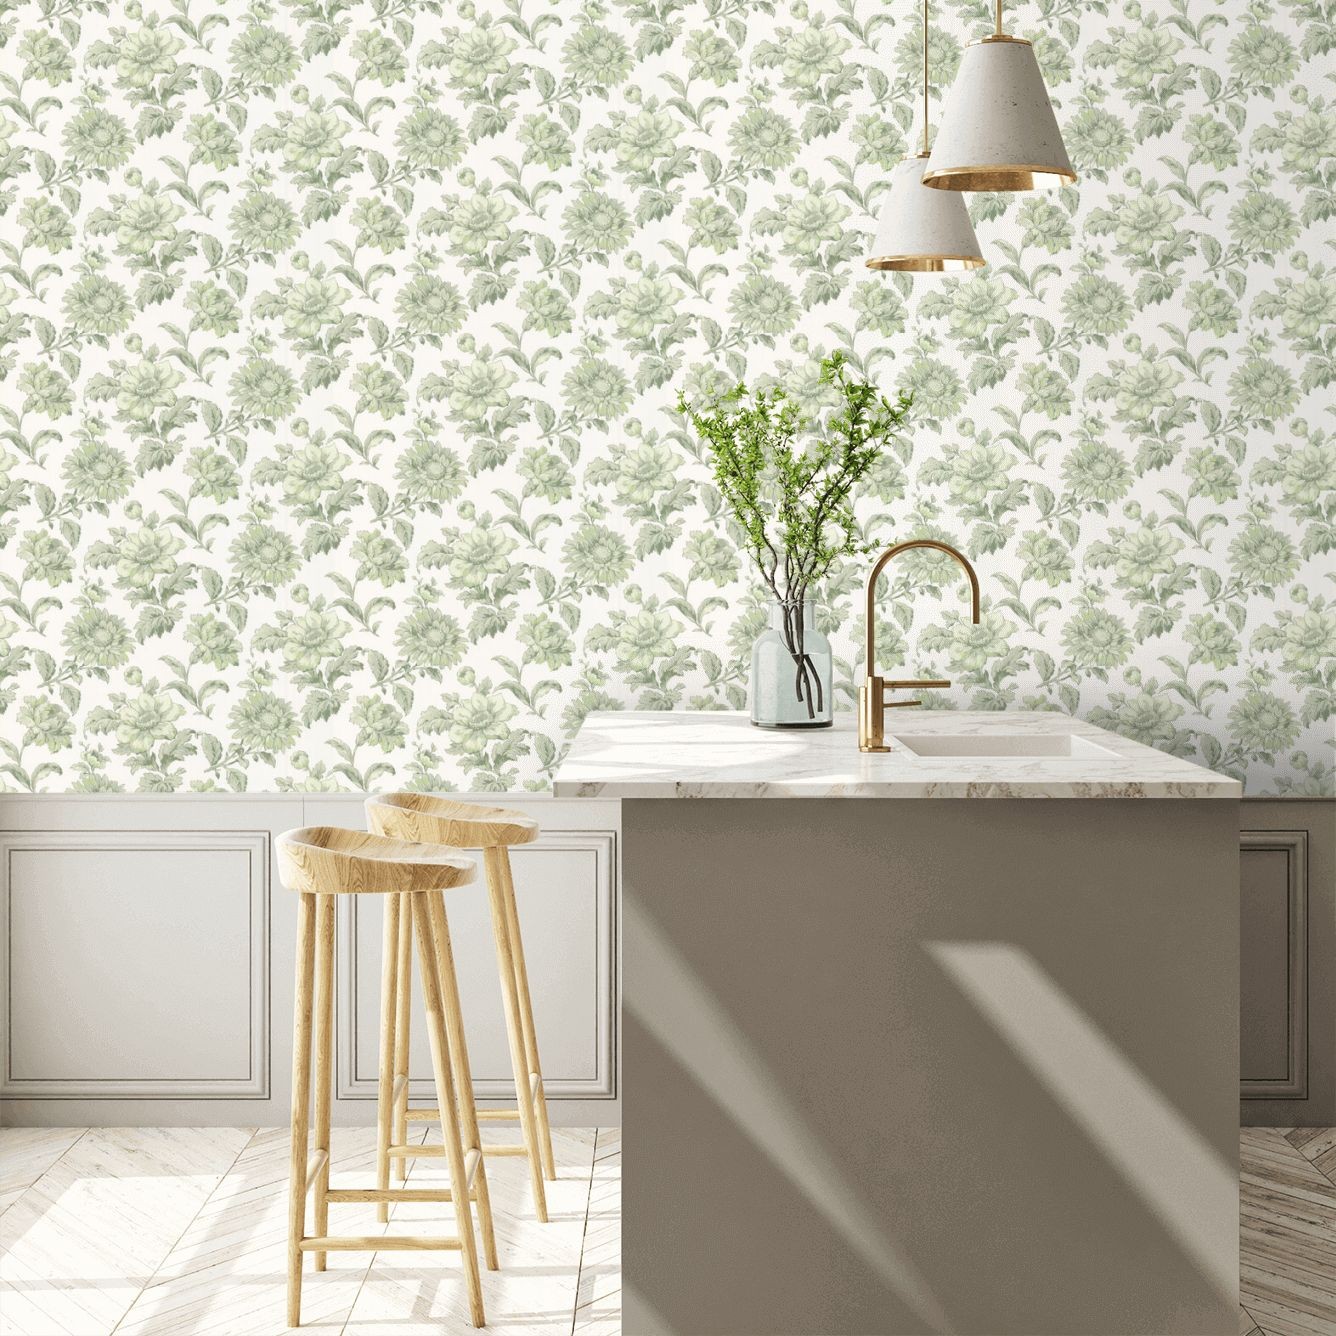 3d Wallpaper Design English Country Style Stock Illustration 1326594839   Shutterstock